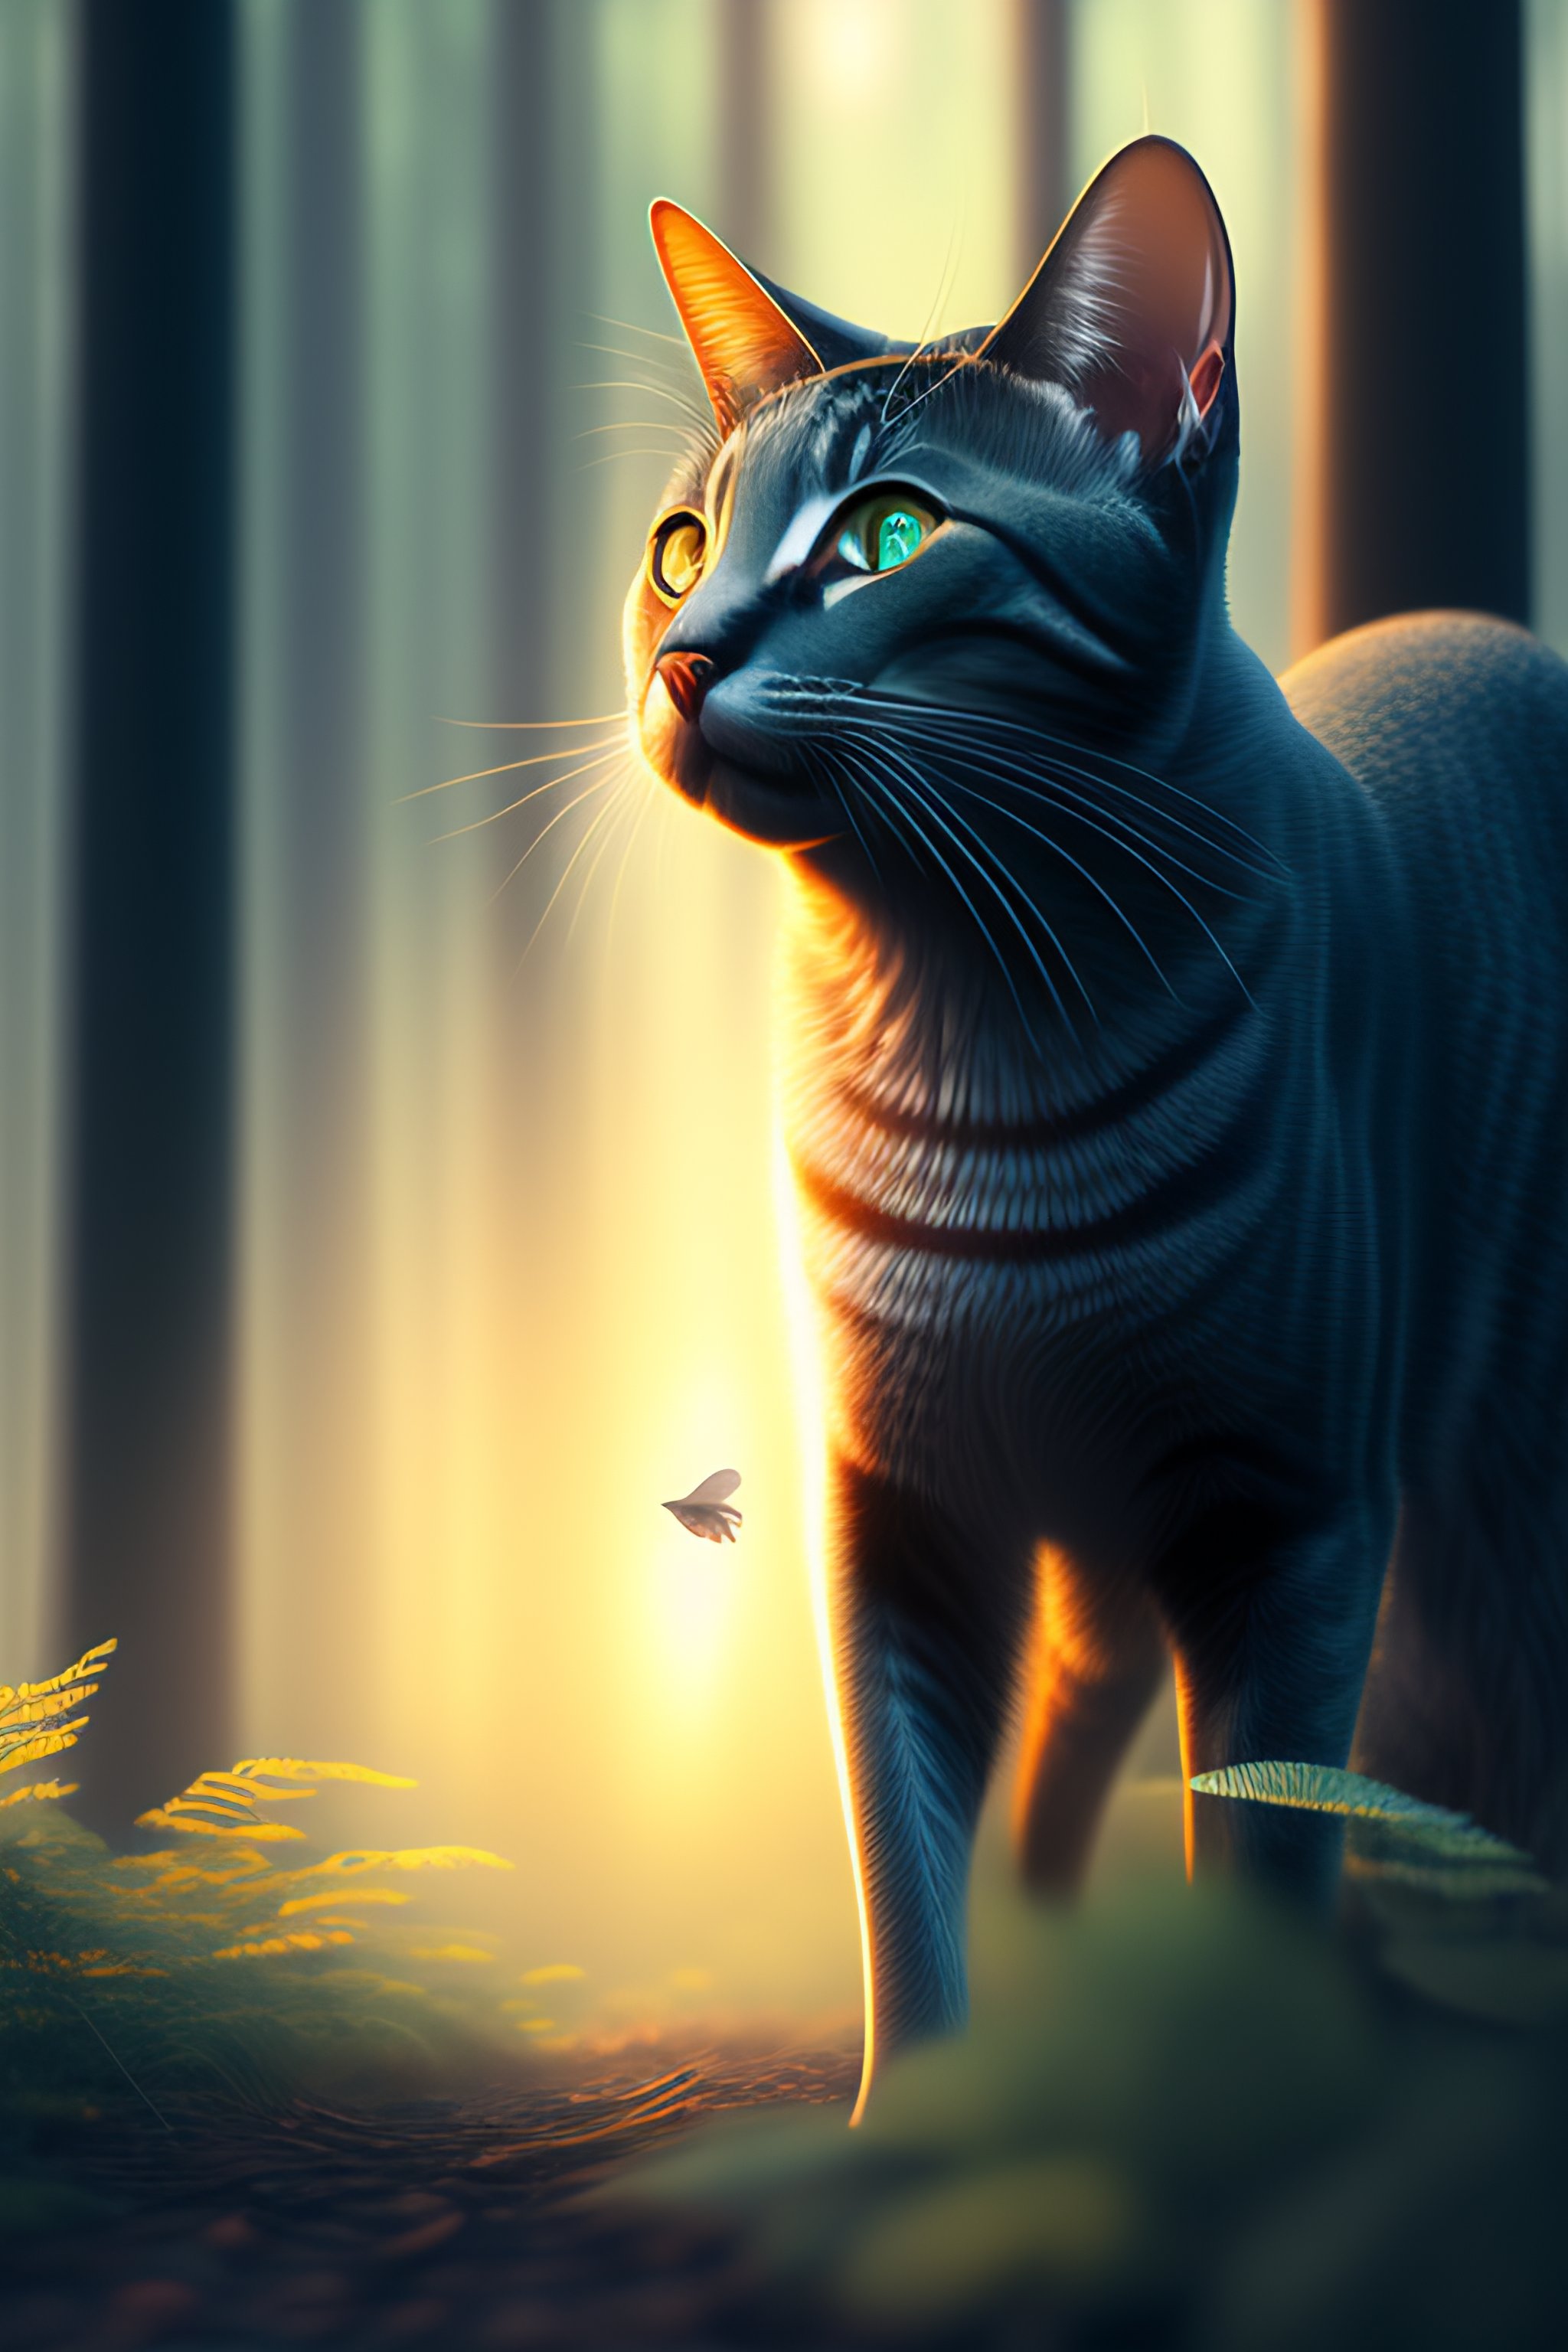 ArtStation - Cats and the forest